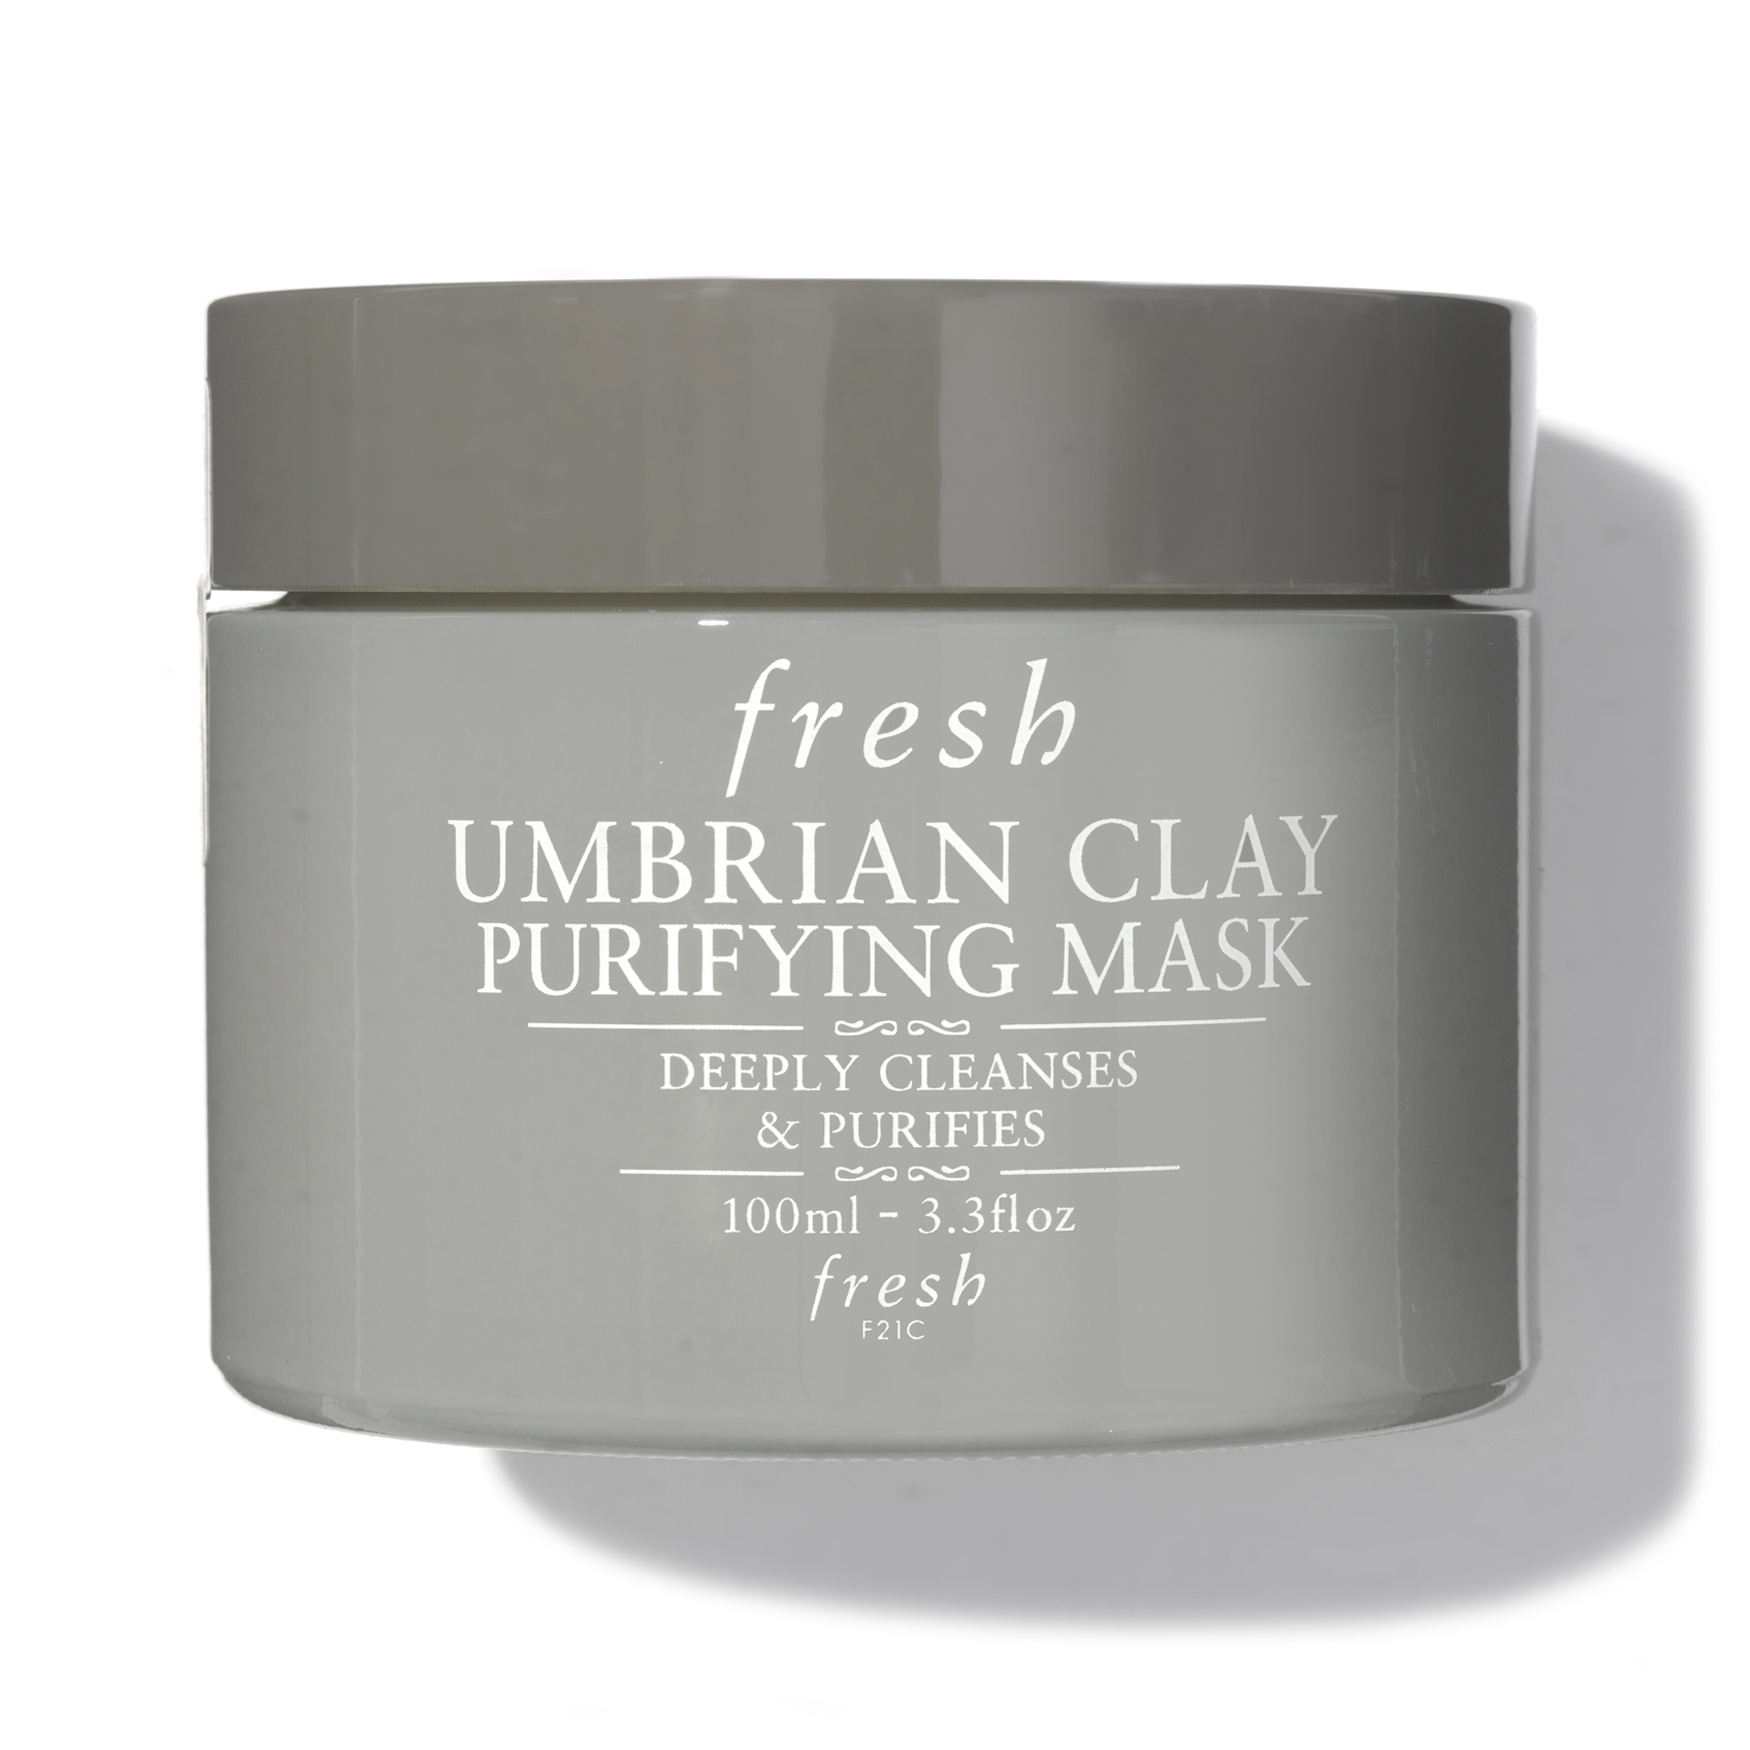 Purifying Clay Masque. Purifying Clay Mask Virta med. Douglas collection Purifying Clay Cream |. Darling Kaolin Gelato bouncy Clay Purifying Mask. Фреш маска отзывы